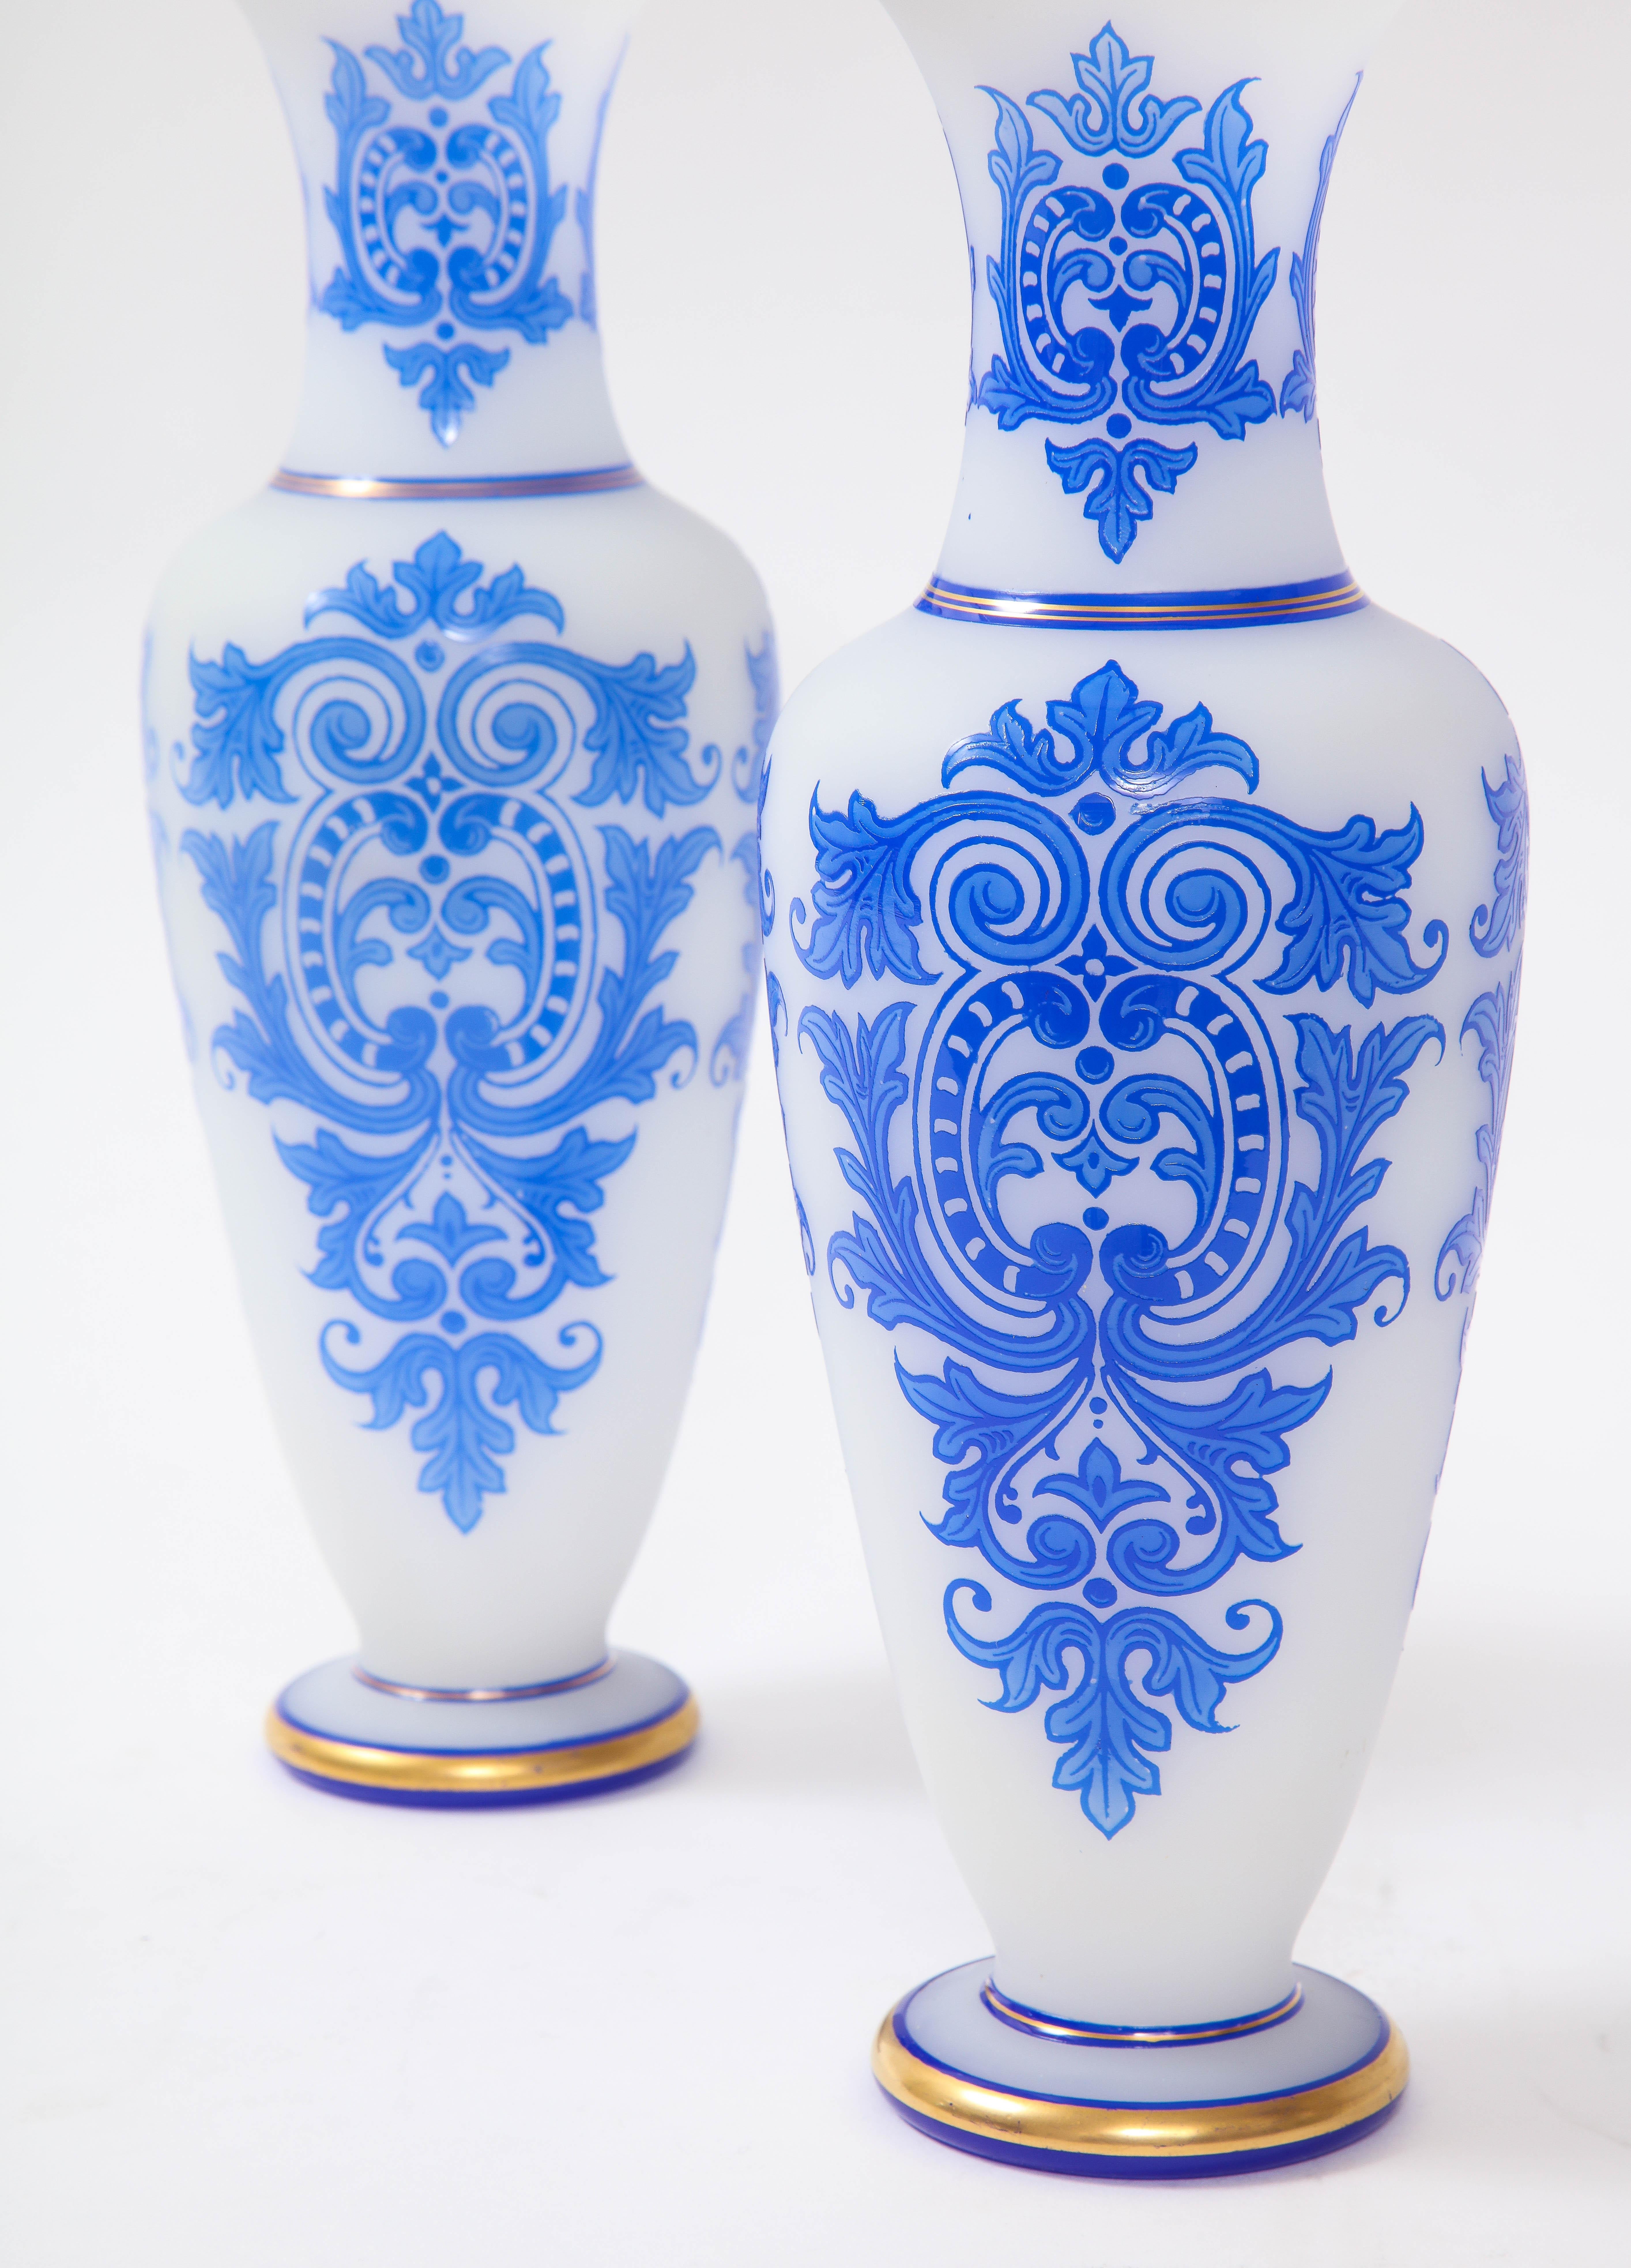 Pair of Baccarat Double Overlay Blue Over White Opaline Vases w/ 24k Gold Decor For Sale 2